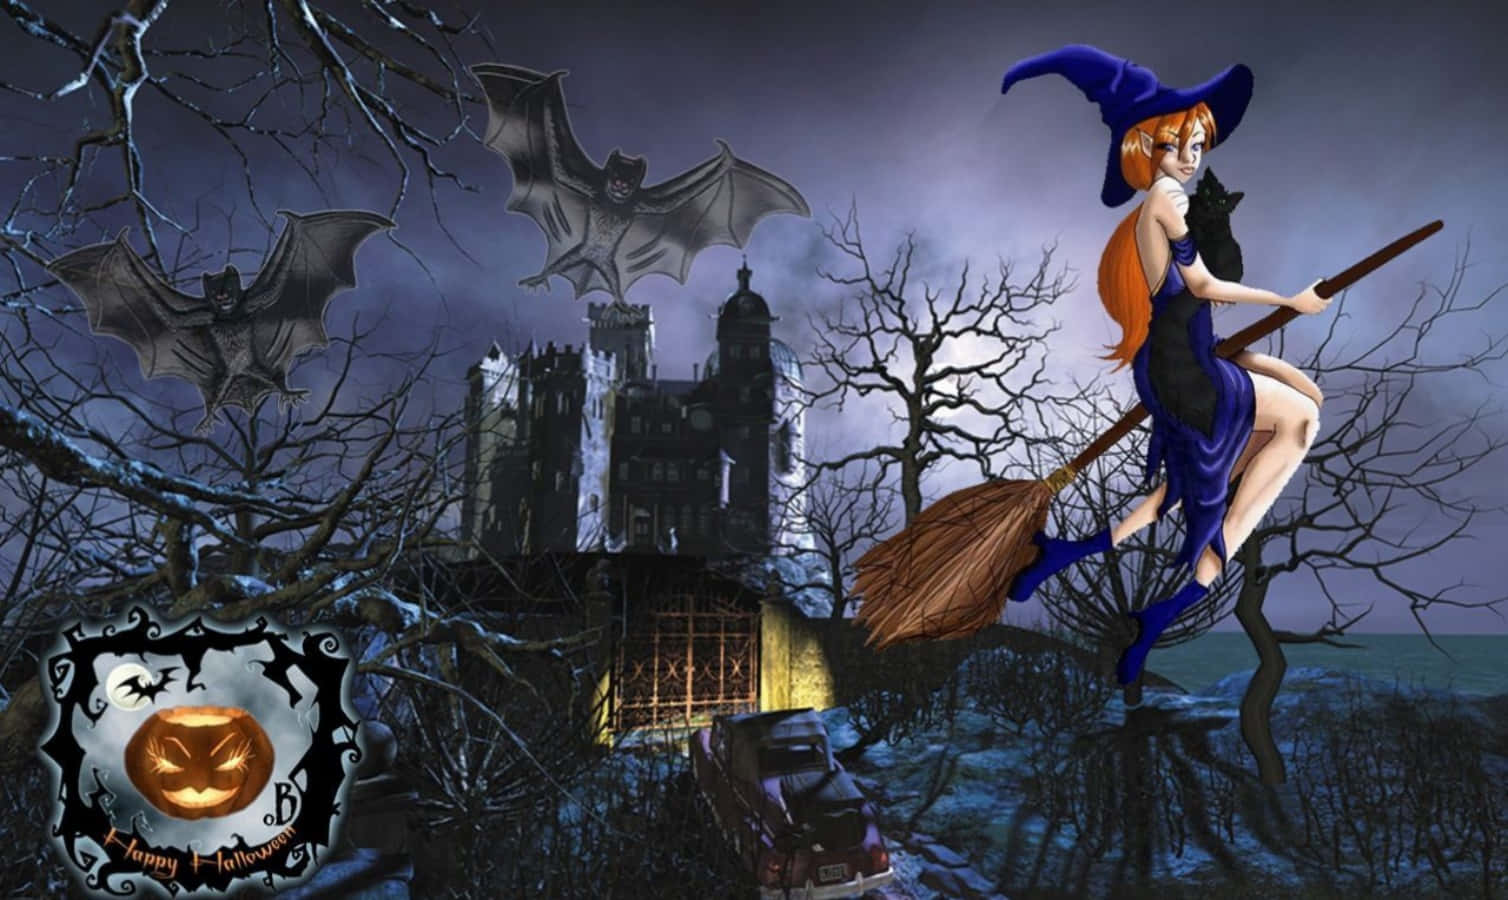 Creepy witch cackles during a full moon on Halloween night. Wallpaper